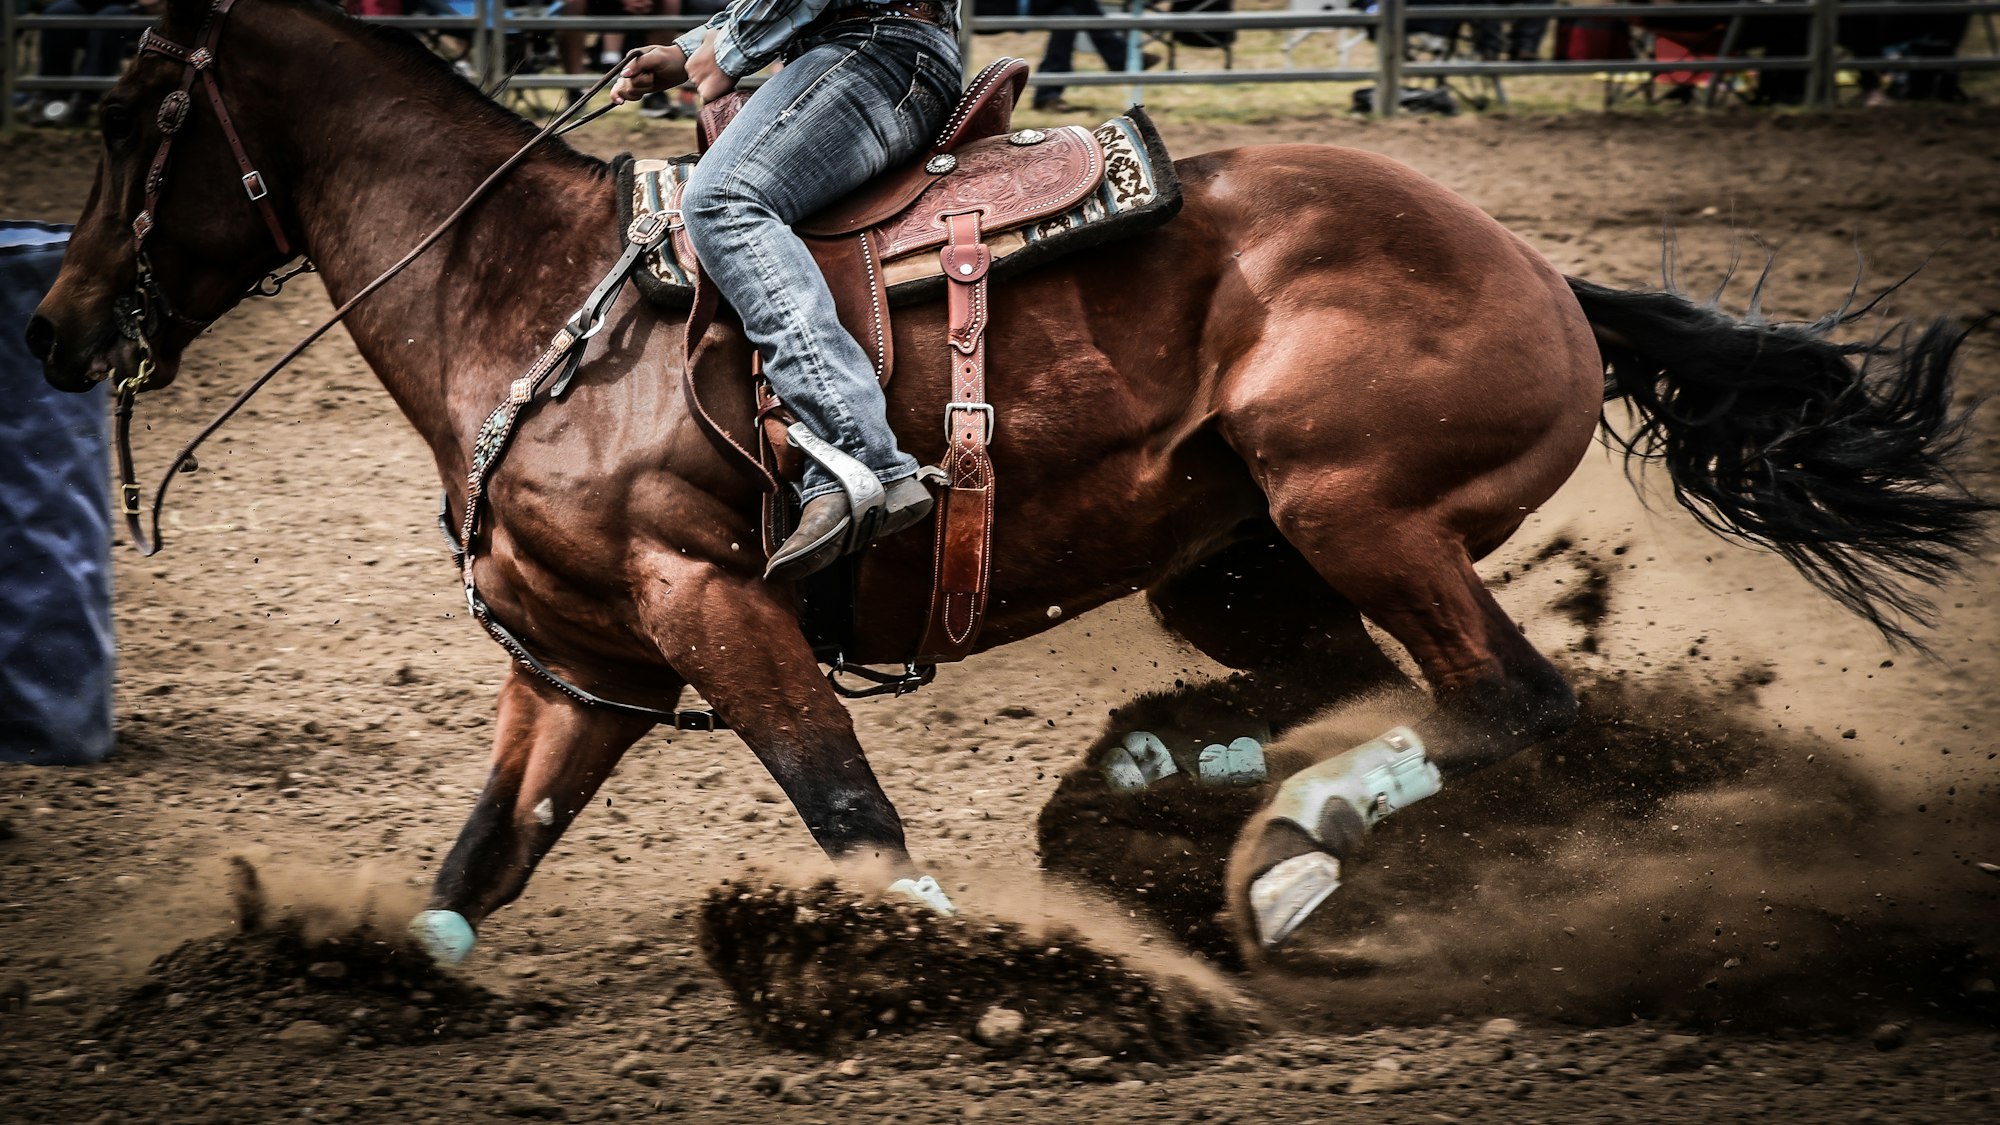 Which State Has The World's Largest Rodeo?